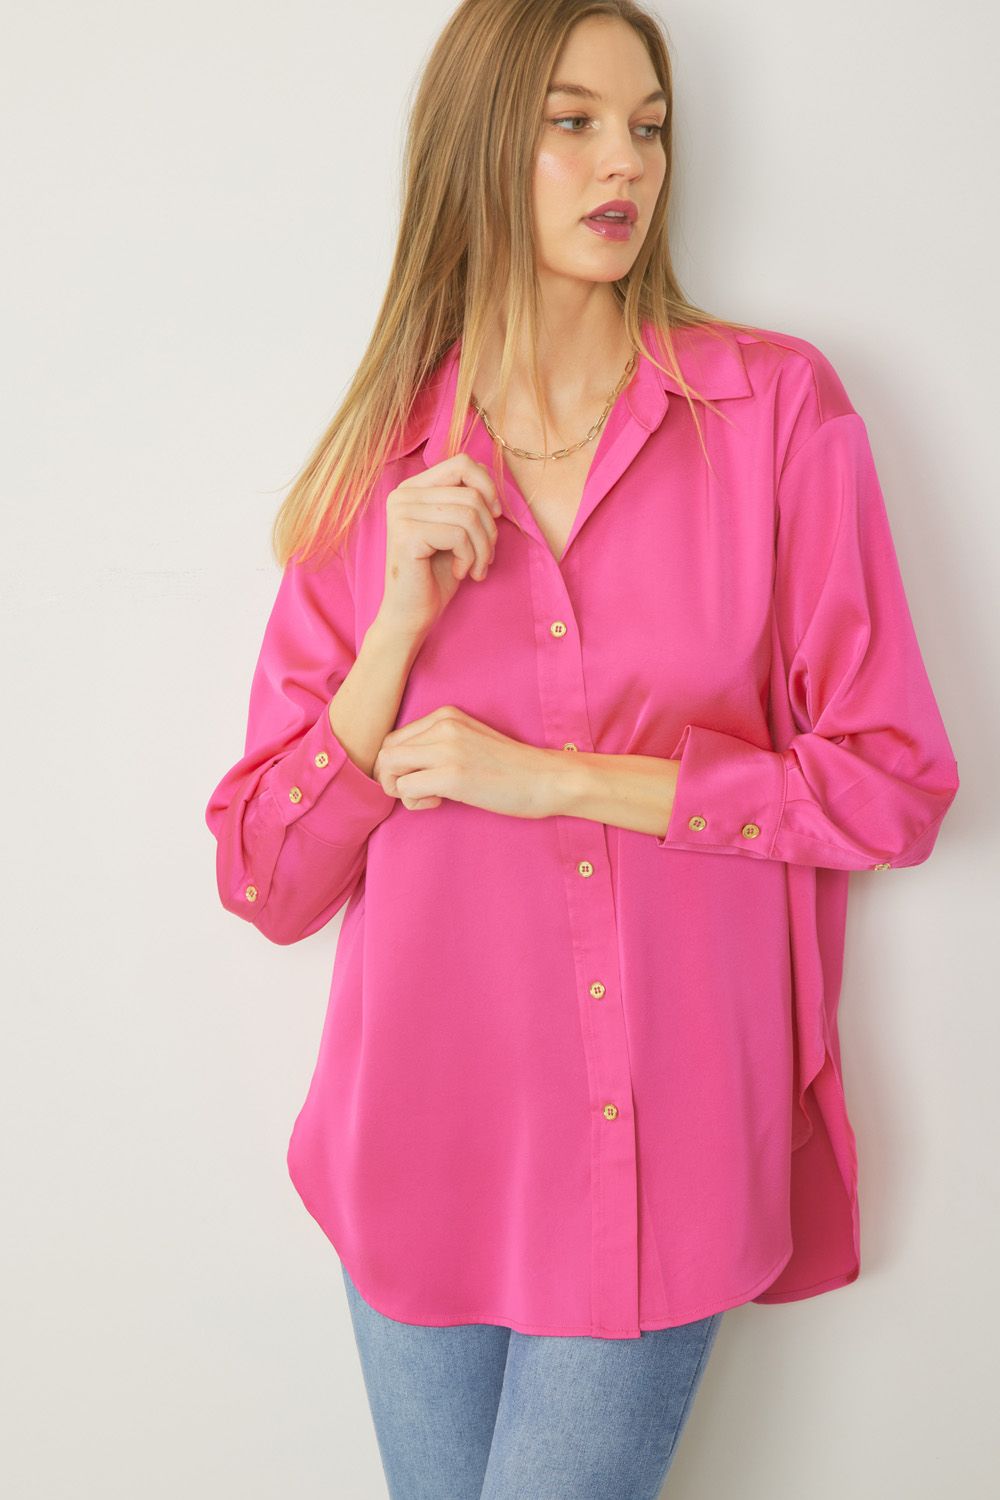 ENTRO INC Women's Top HOT PINK / S Satin Button Up Collared Top || David's Clothing T18724A